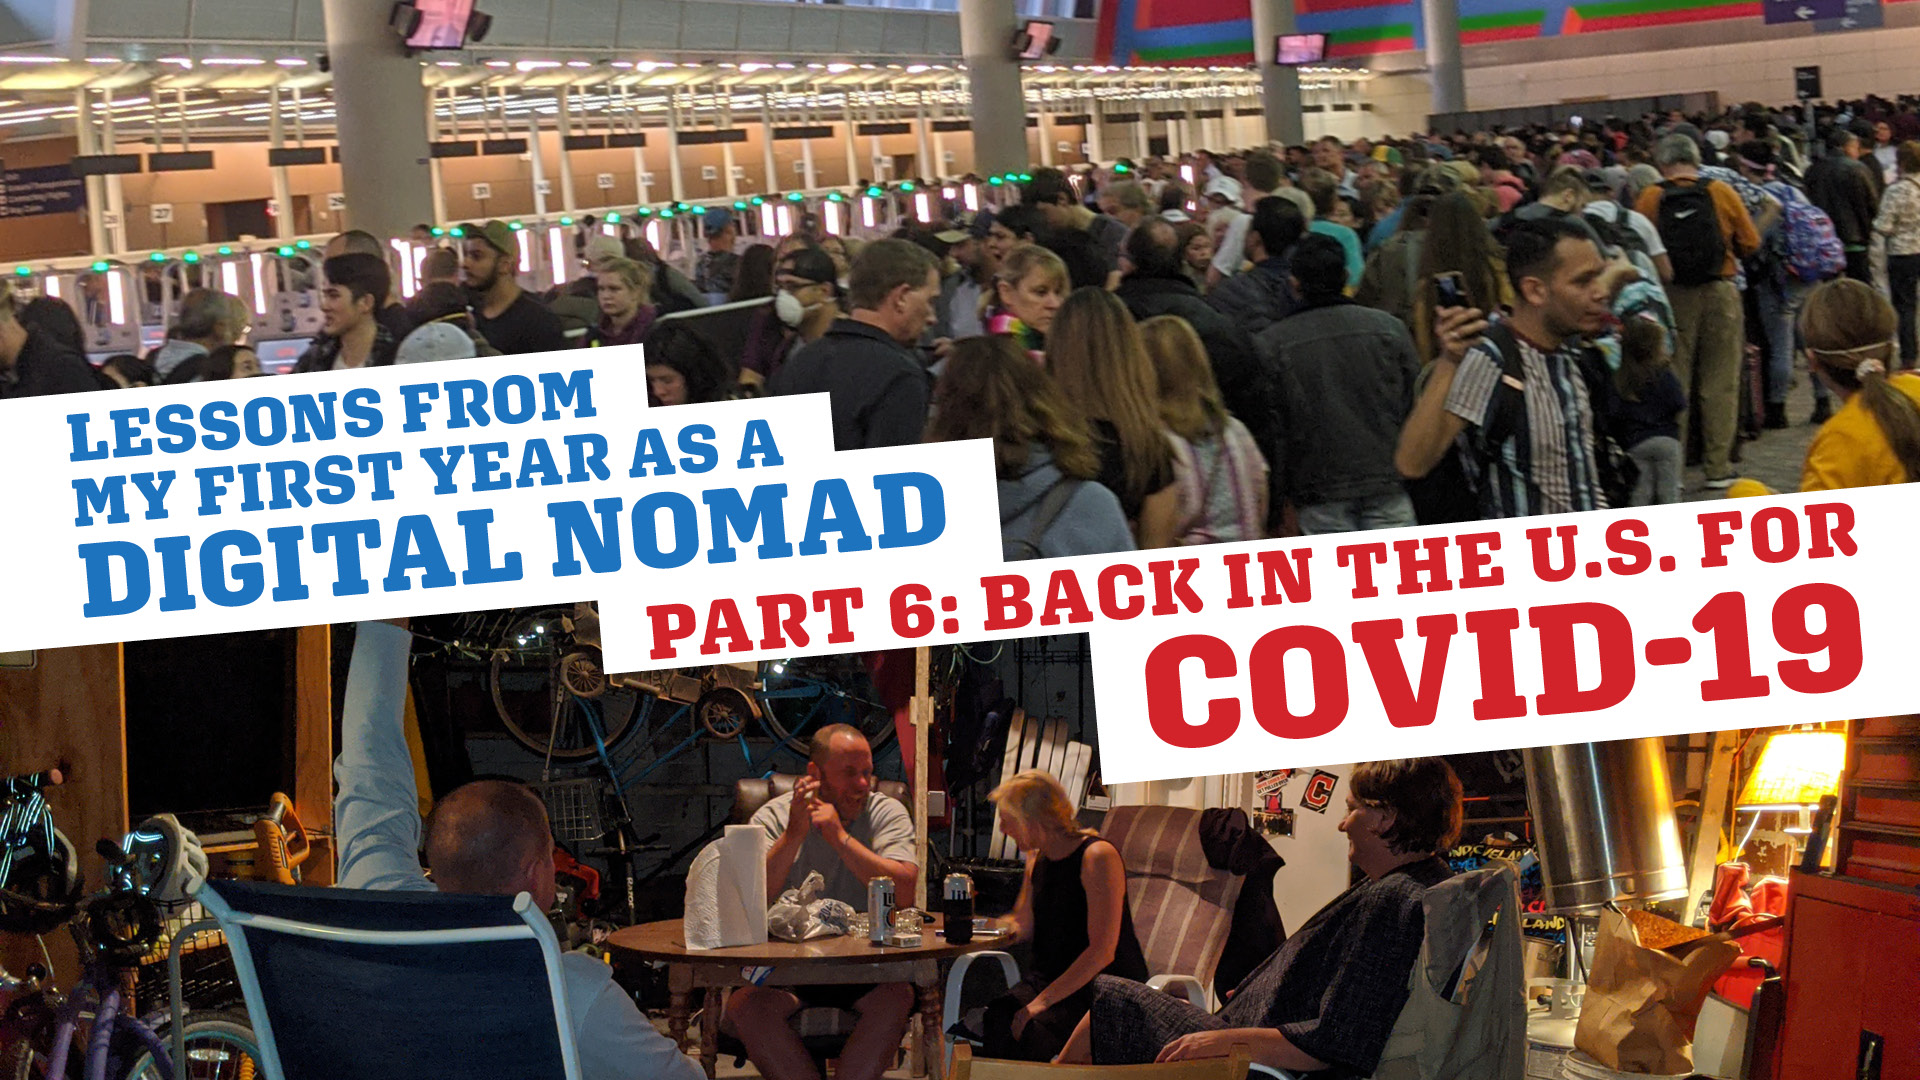 The Nomad Experiment Lessons of a Digital nomad COVID 19 article part 6